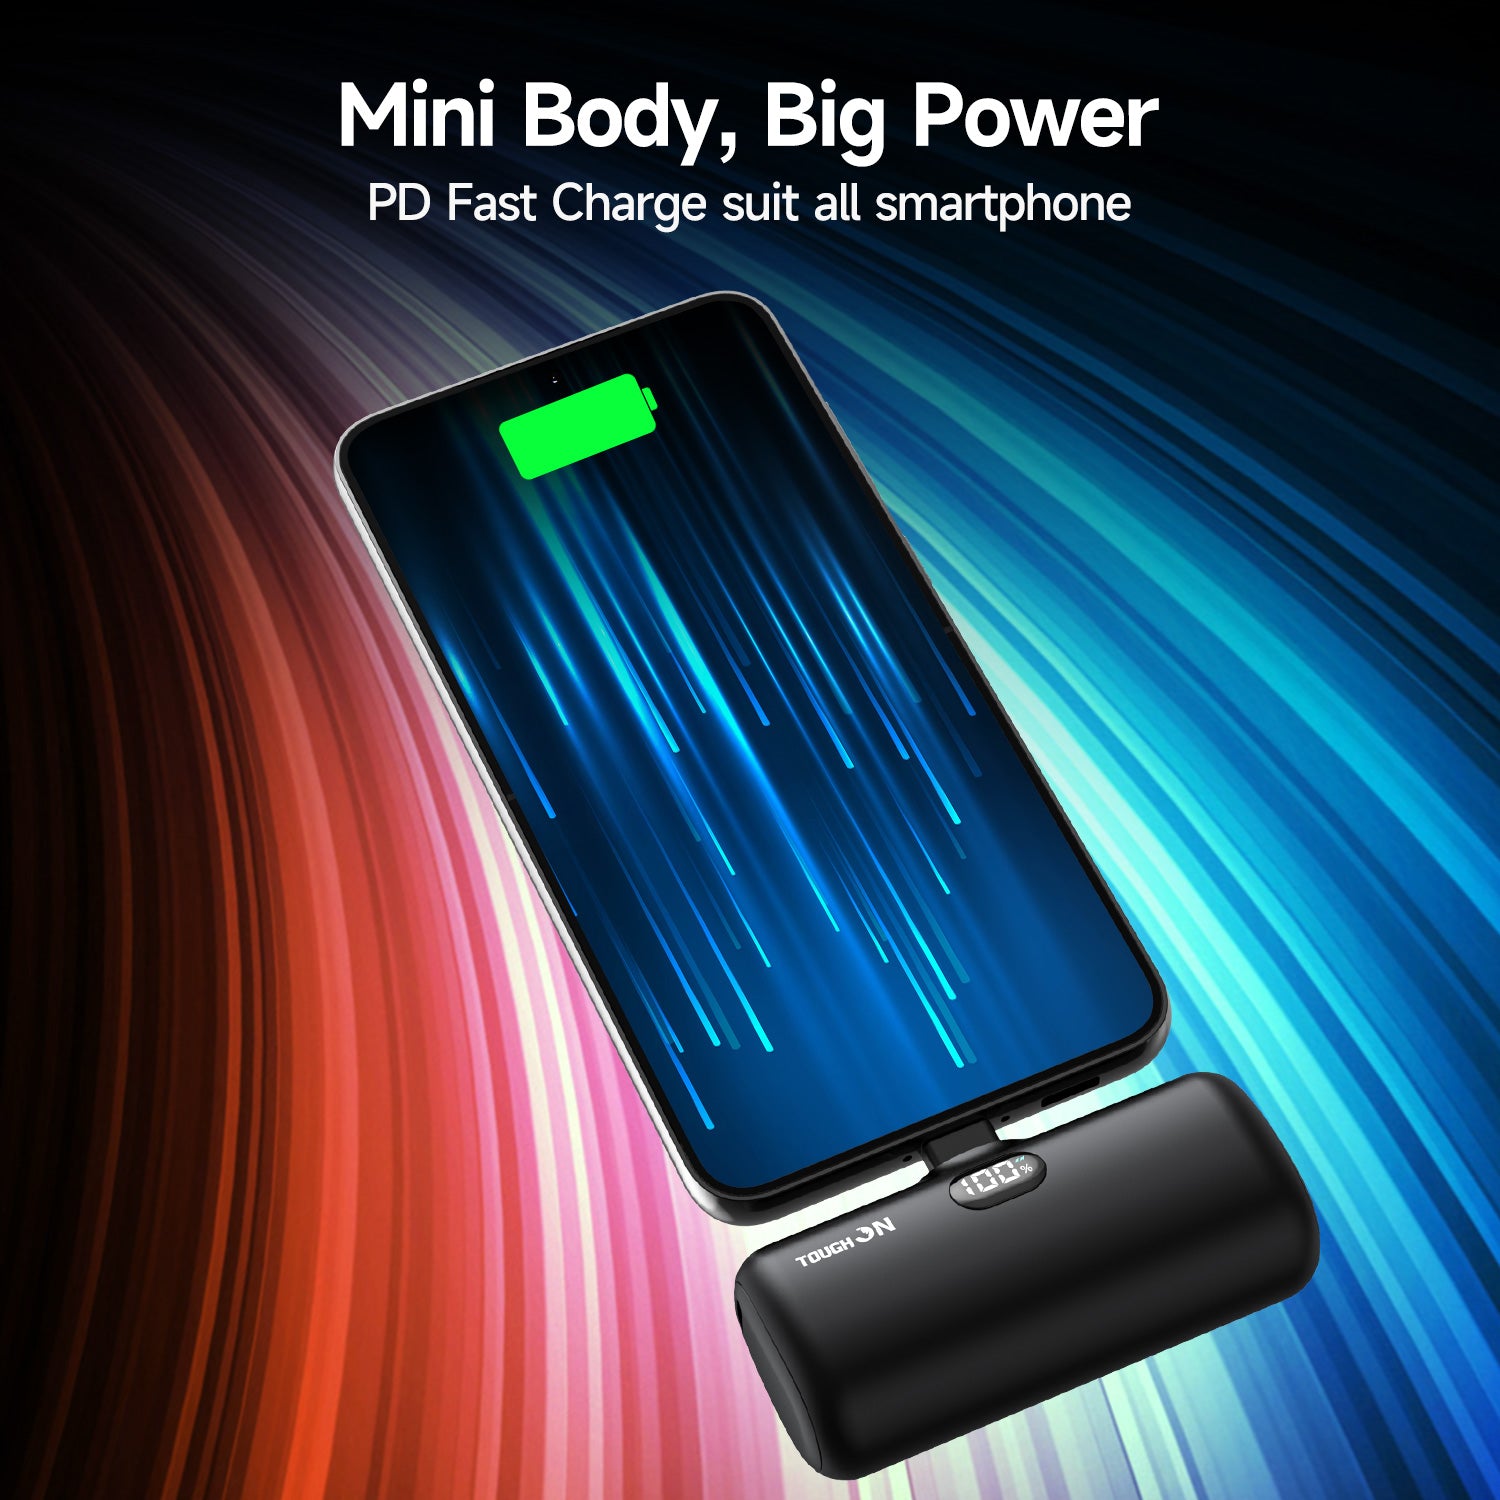 Tough On Mini Portable Charger 5000mAh Power Bank USB C Charging for Samsung Android iPhone 15 Series